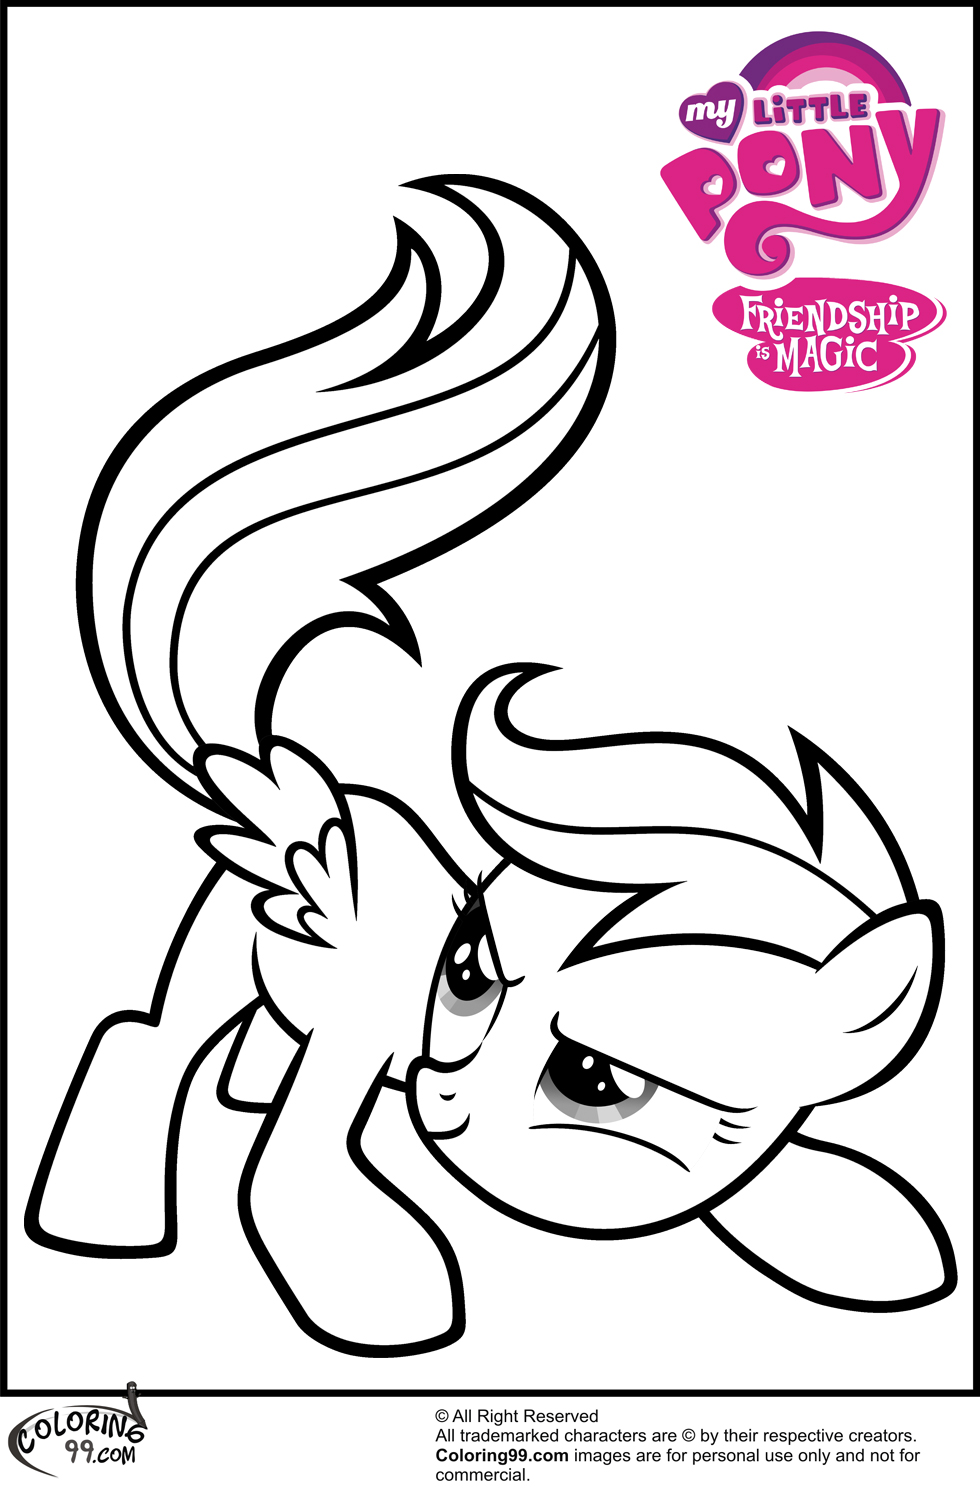 MLP Scootaloo Coloring Pages | Team colors